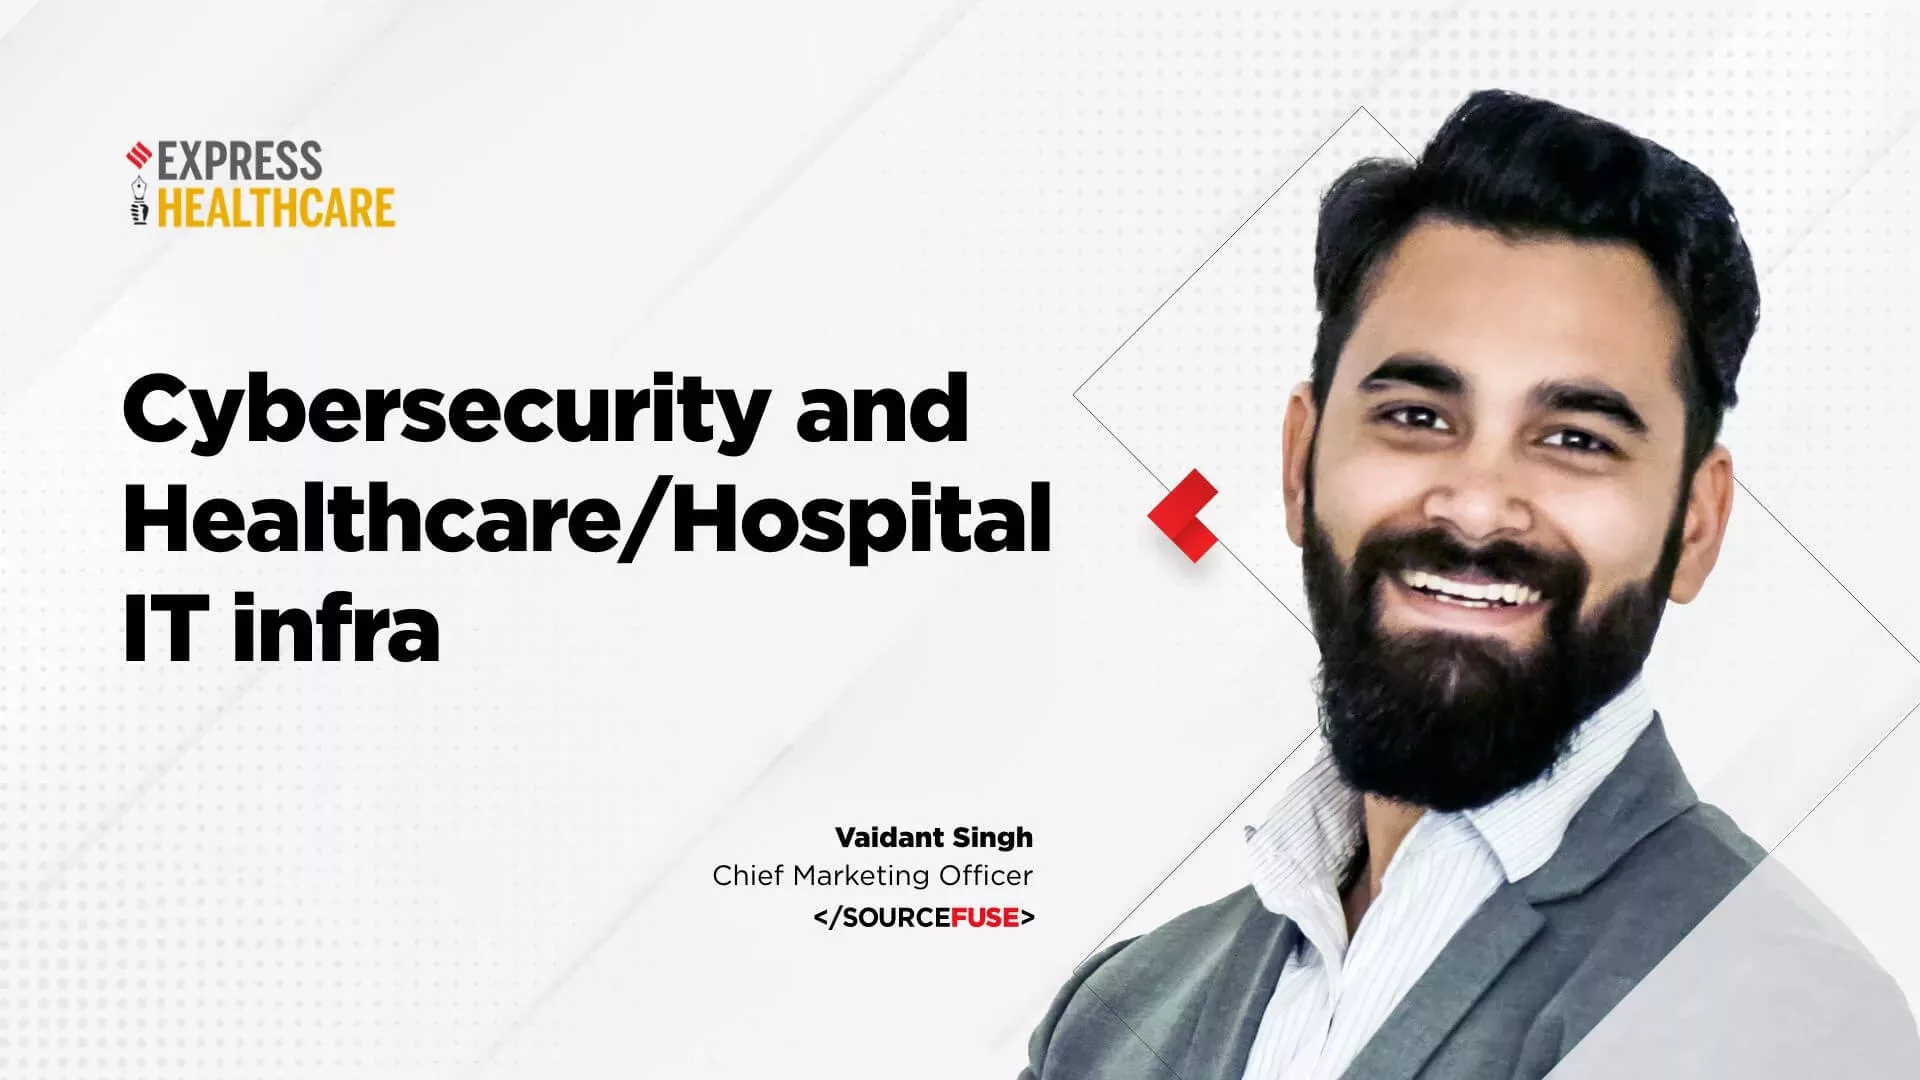 Discover how SourceFuse enables Healthcare Enterprises with Secure Cloud Solutions